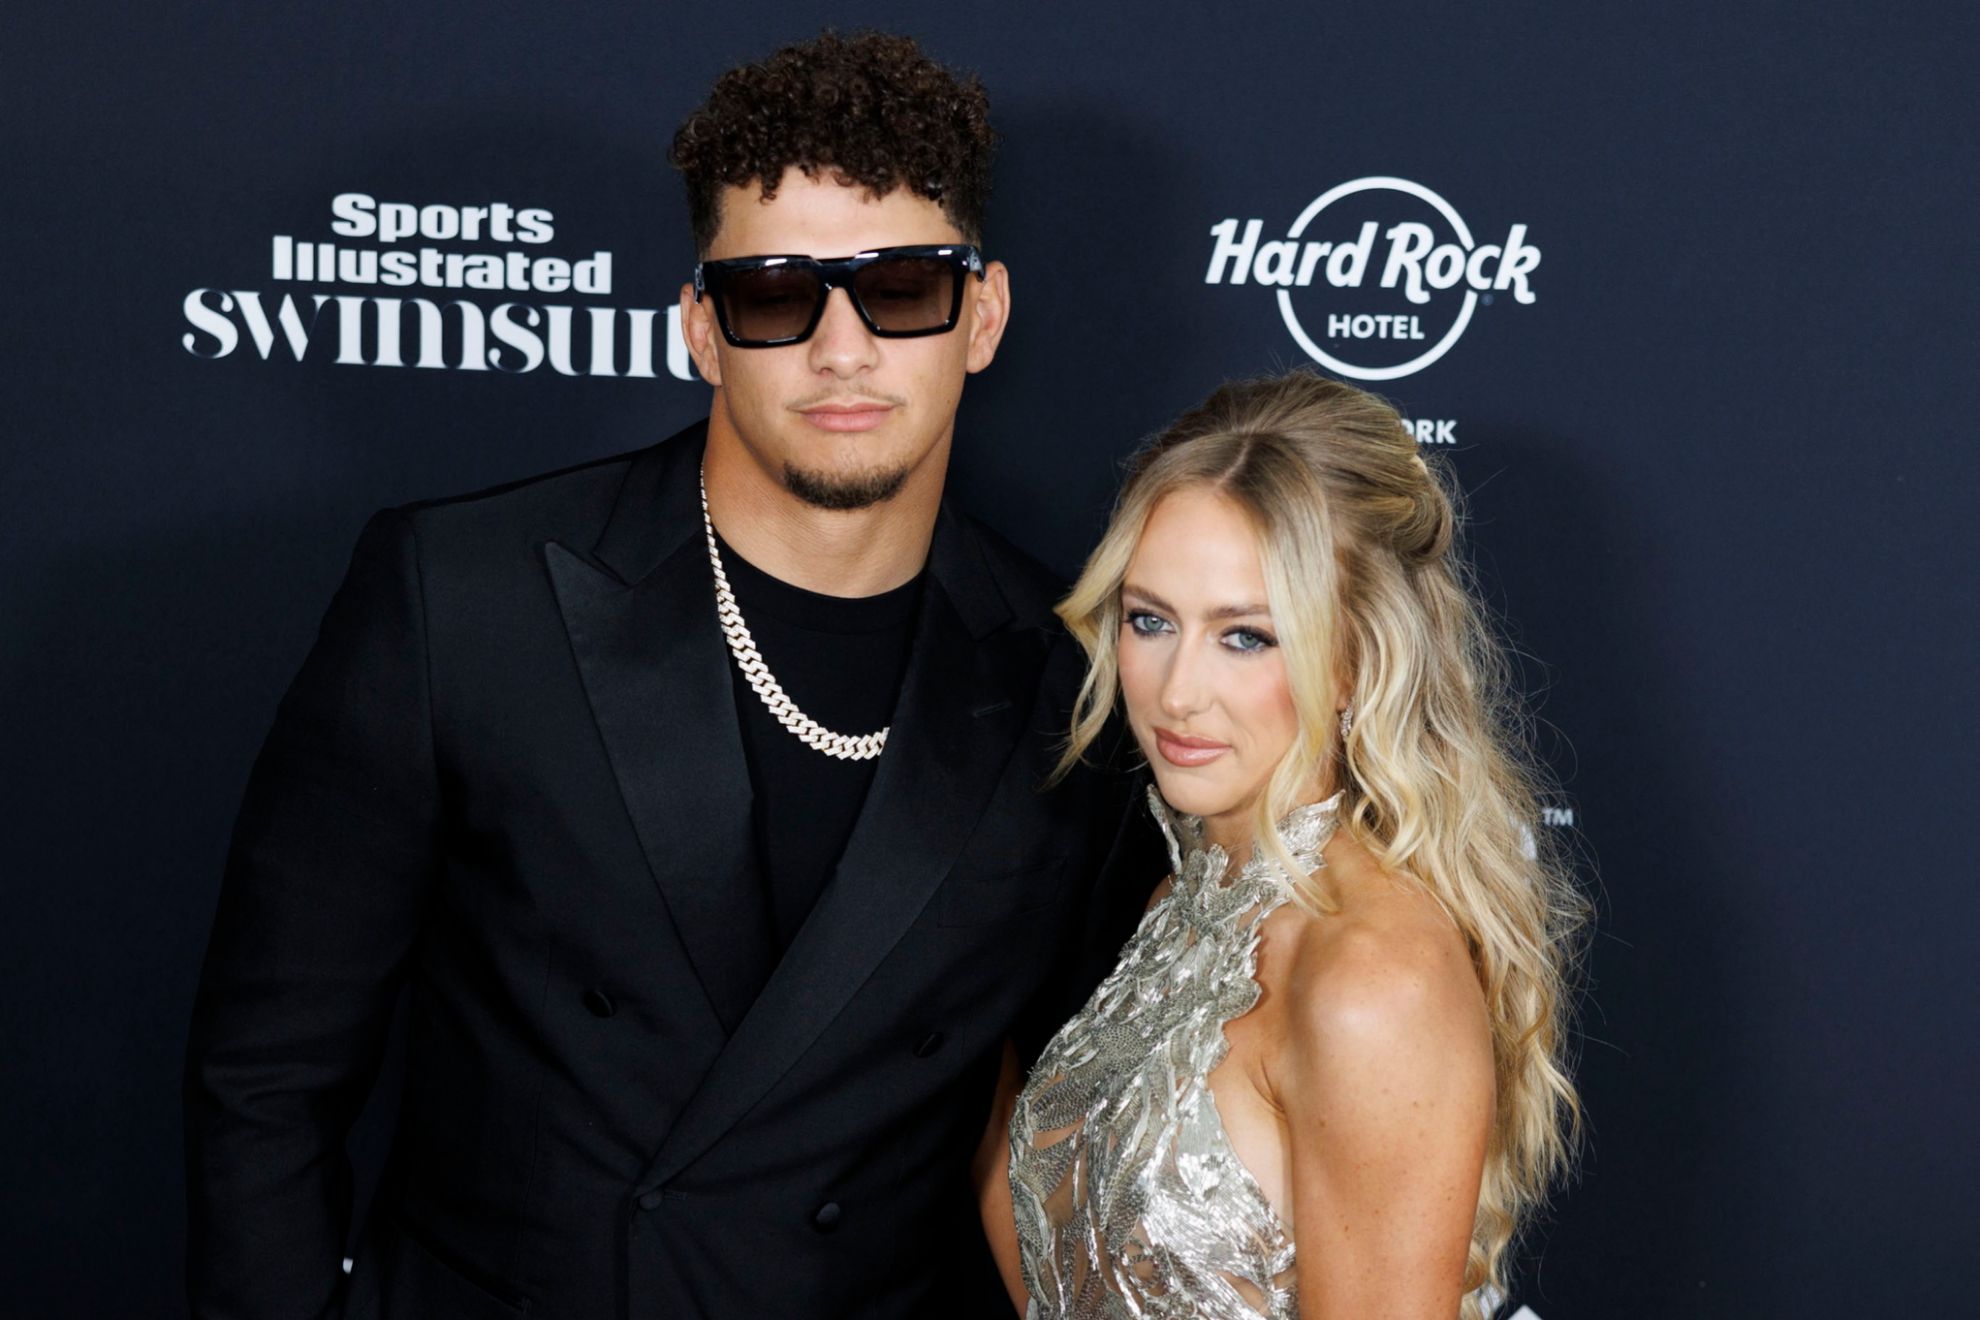 Brittany Mahomes posts revealing photo of Sterling that Patrick is proud of: Patrick Mahomes is a self-confessed NBA and basketball fanatic